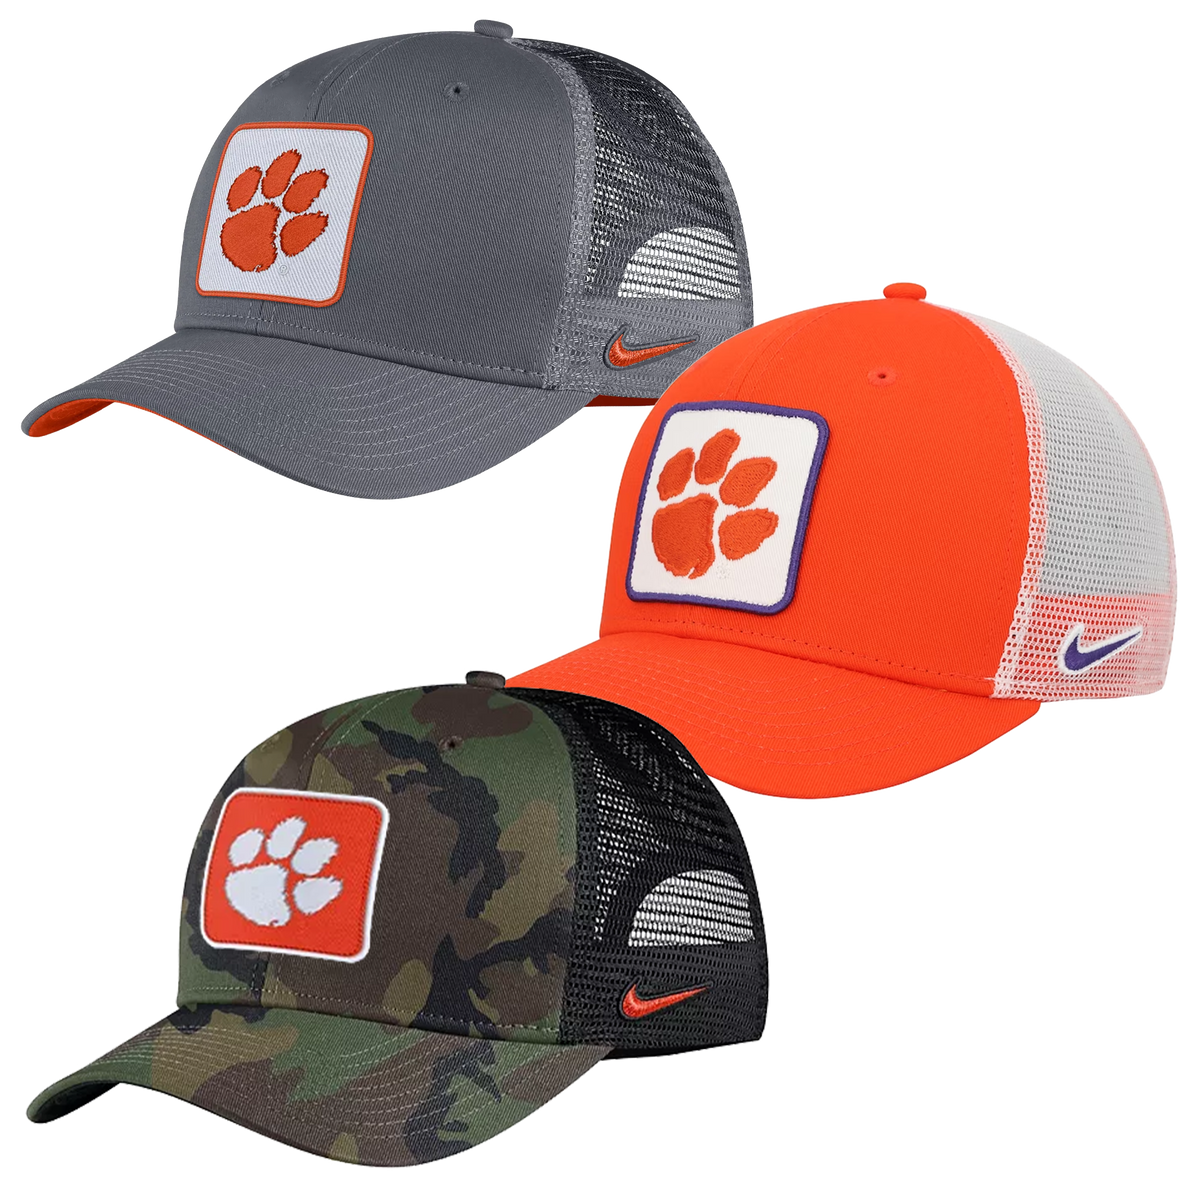 Nike C99 Trucker Hat with Paw